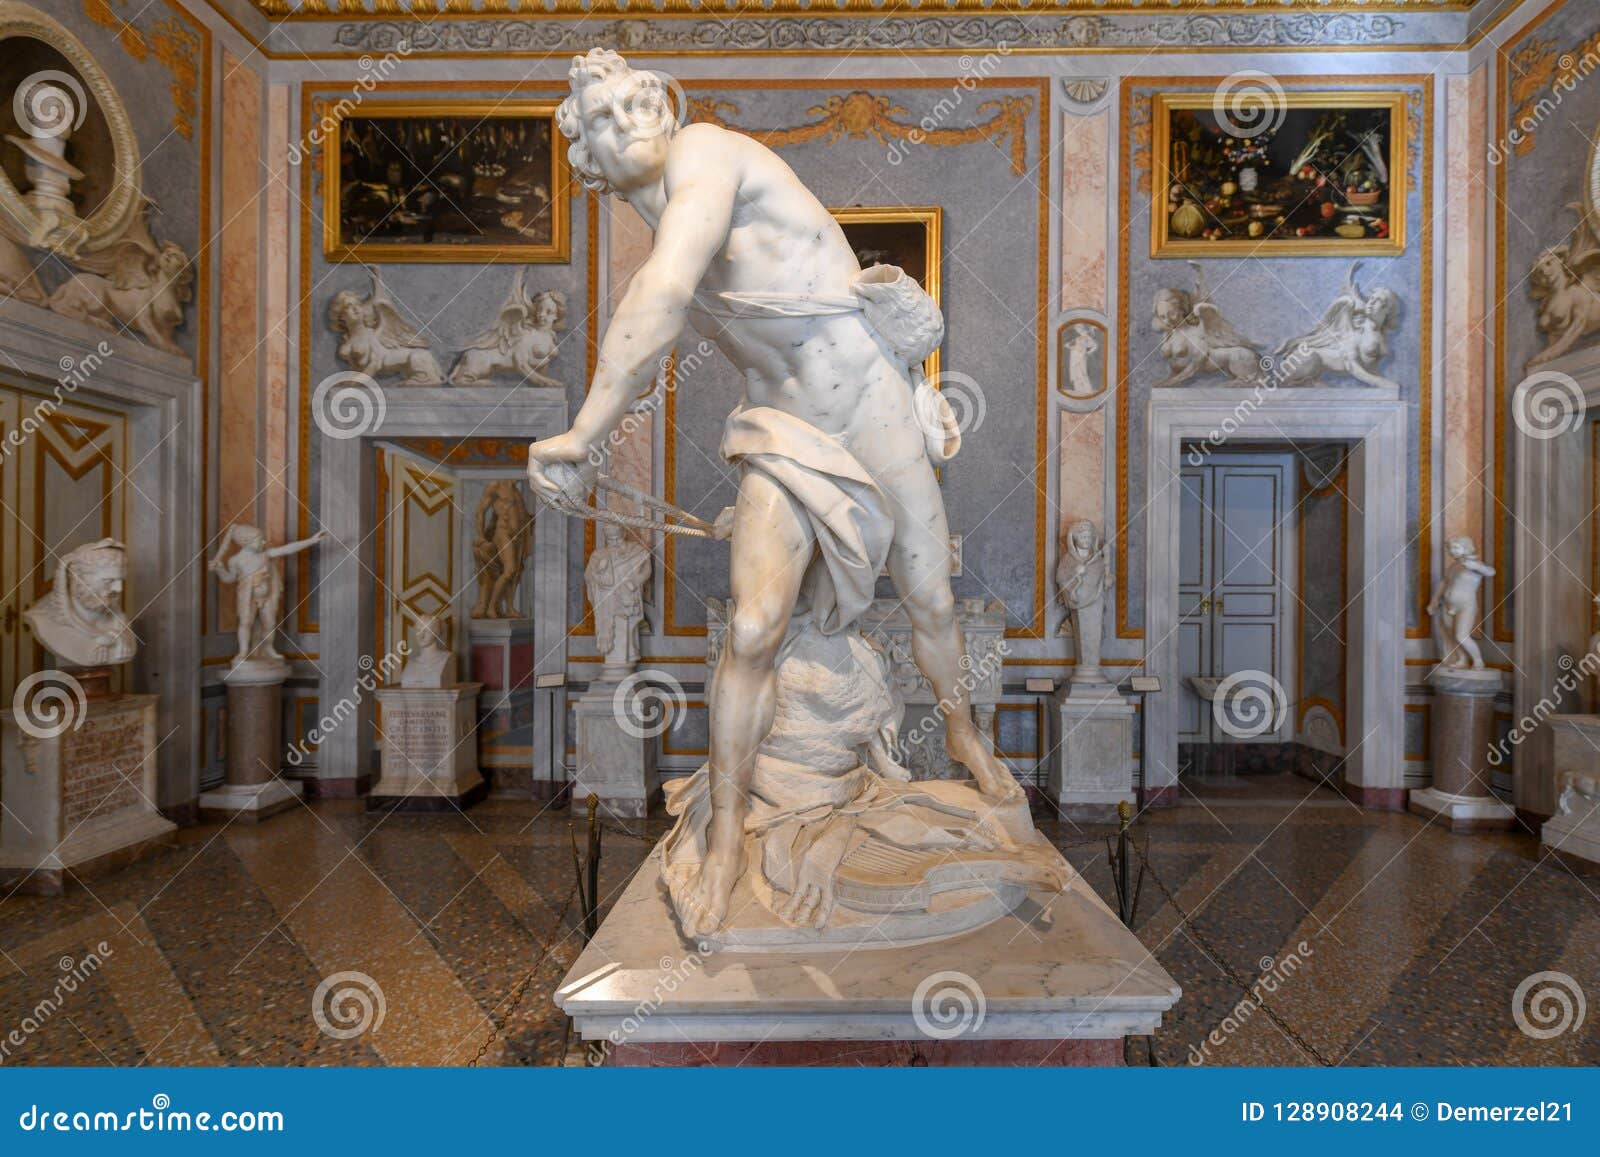 Villa Borghese - Rome, Italy Editorial Stock Image - Image of building ...